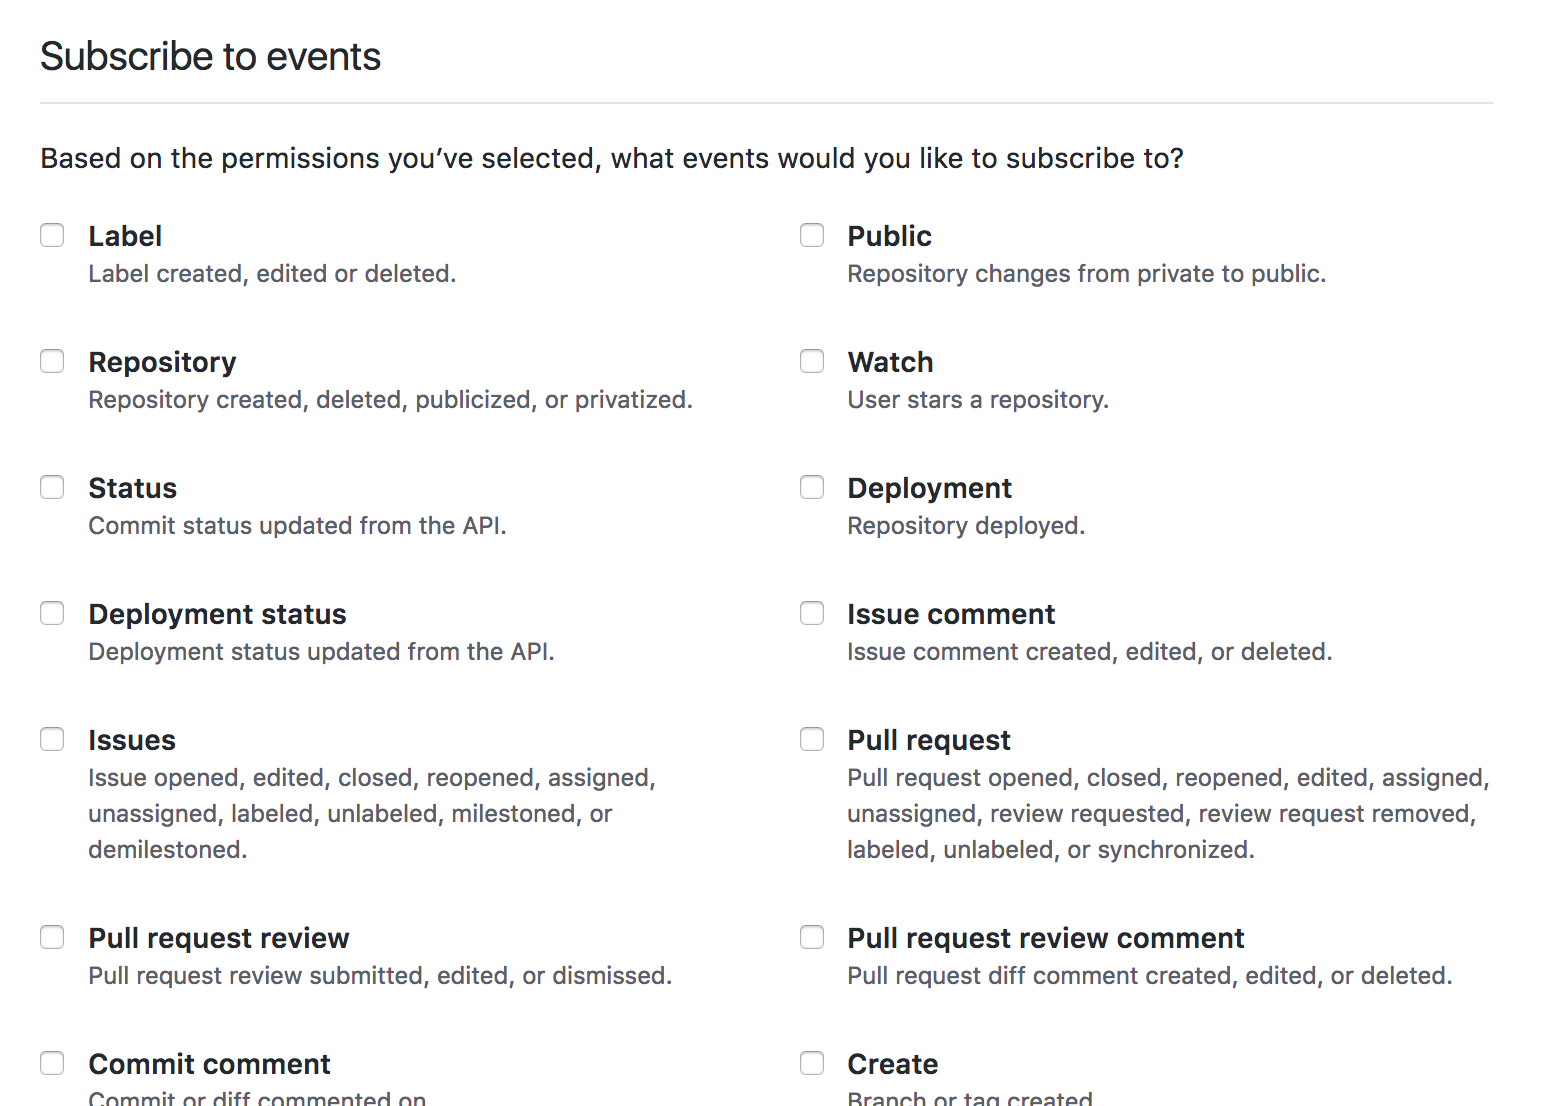 Permissions selections for subscribing your GitHub App to events